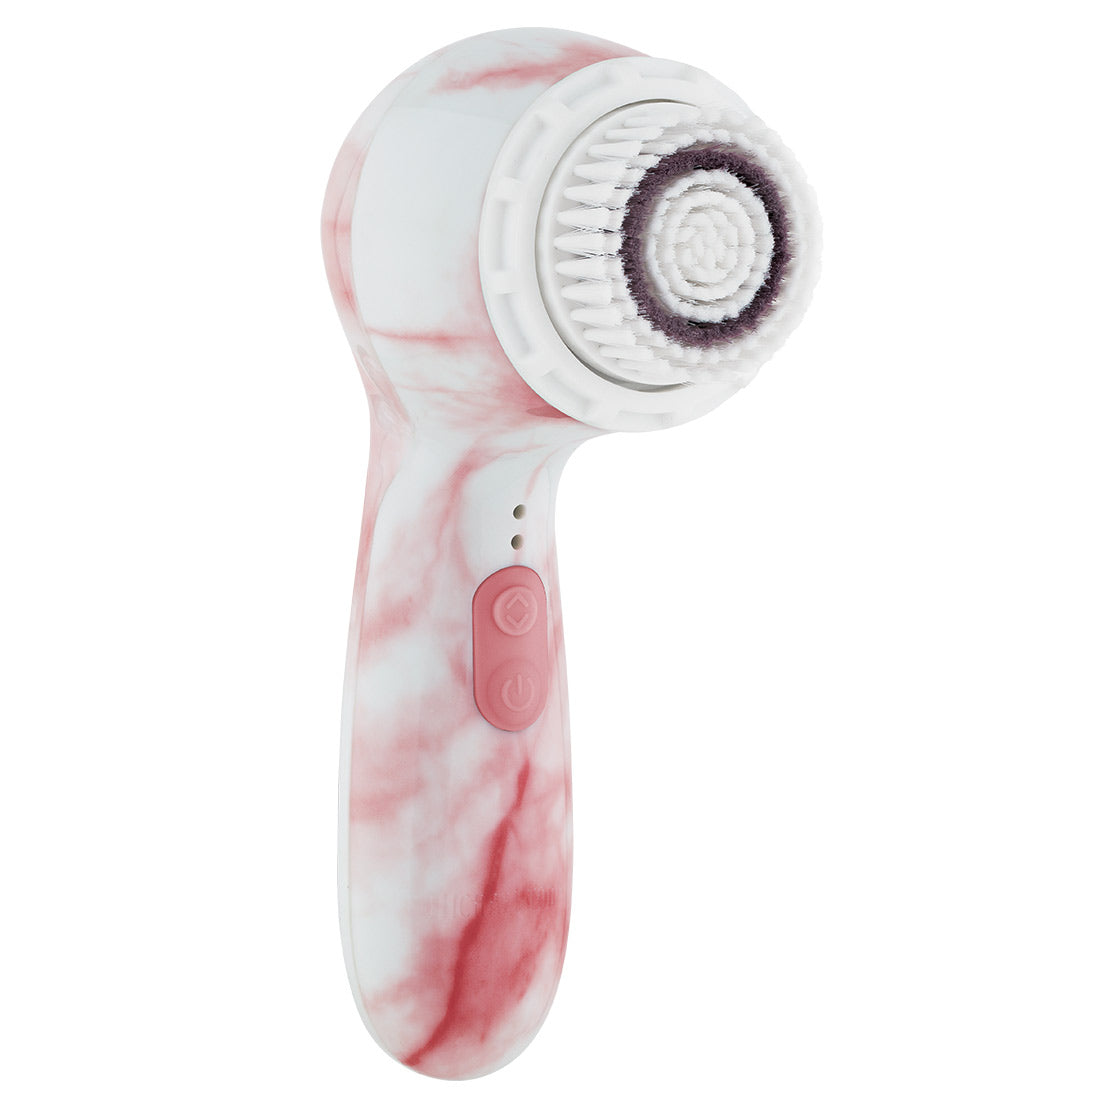 Rose Marble Soniclear Petite Sonic Facial Cleansing Brush